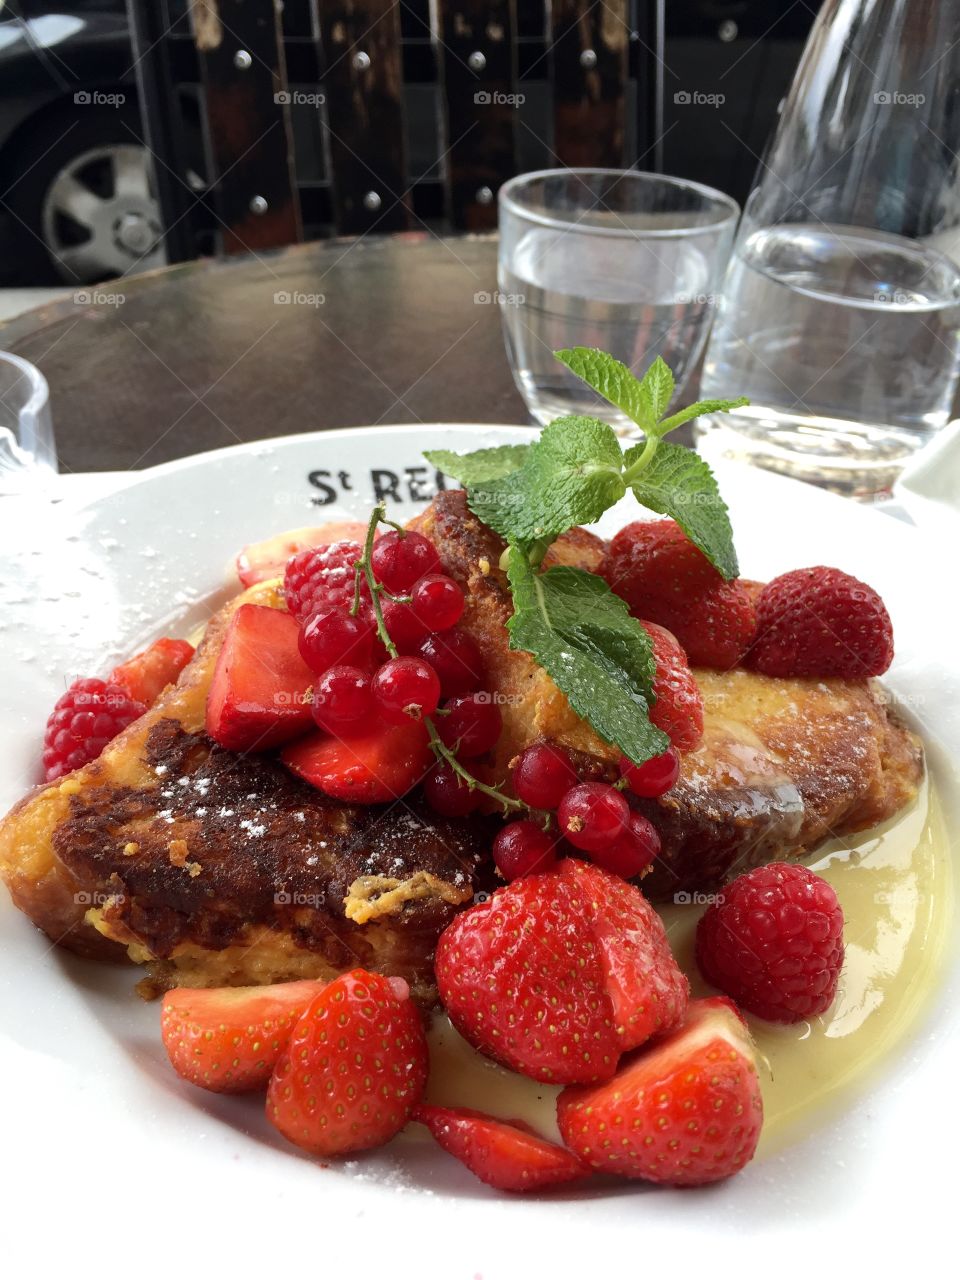 French Toast with Berries. French toast with berries and custard at Cafe St Regis on the Ile St Louis in Paris.